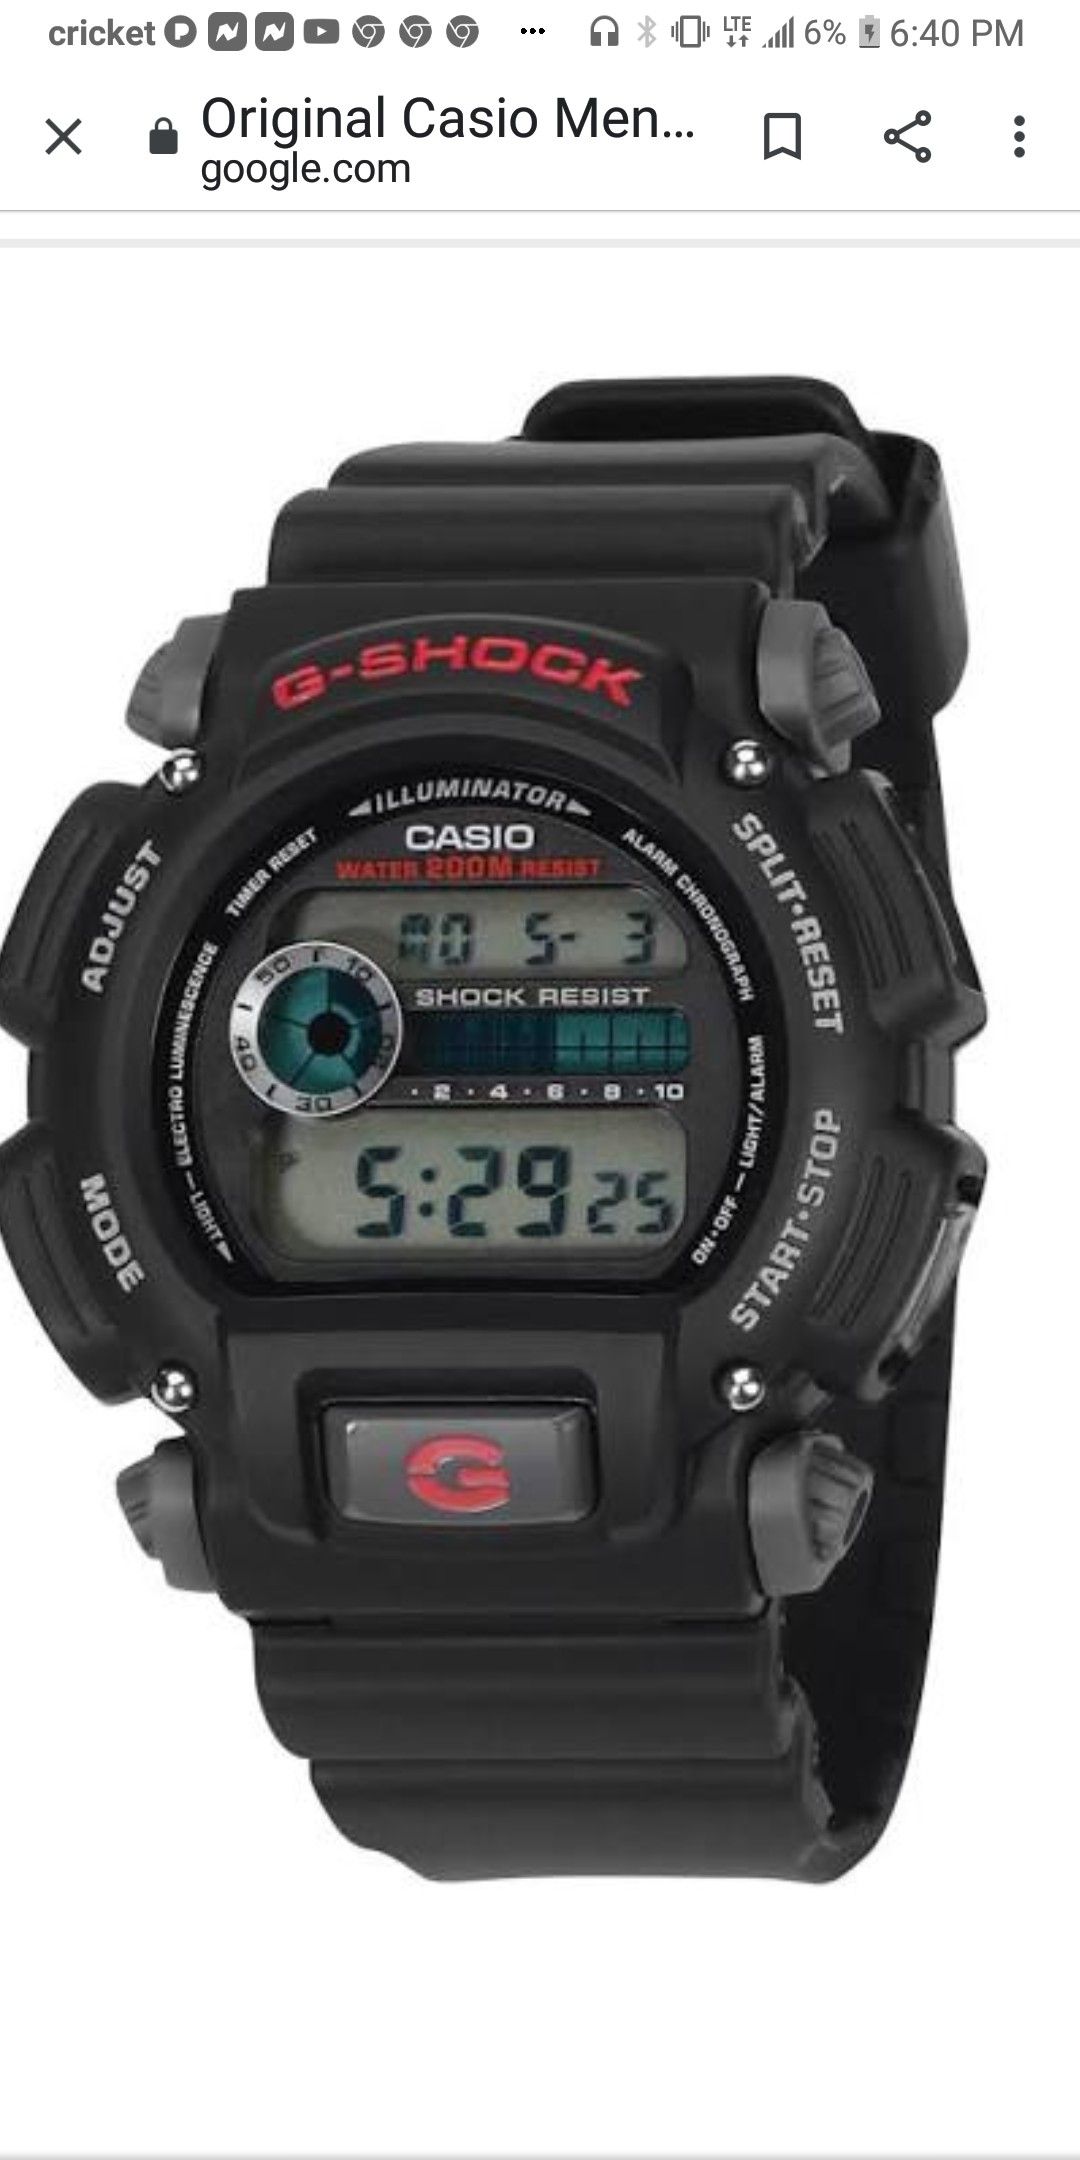 G shockg shock in great condition